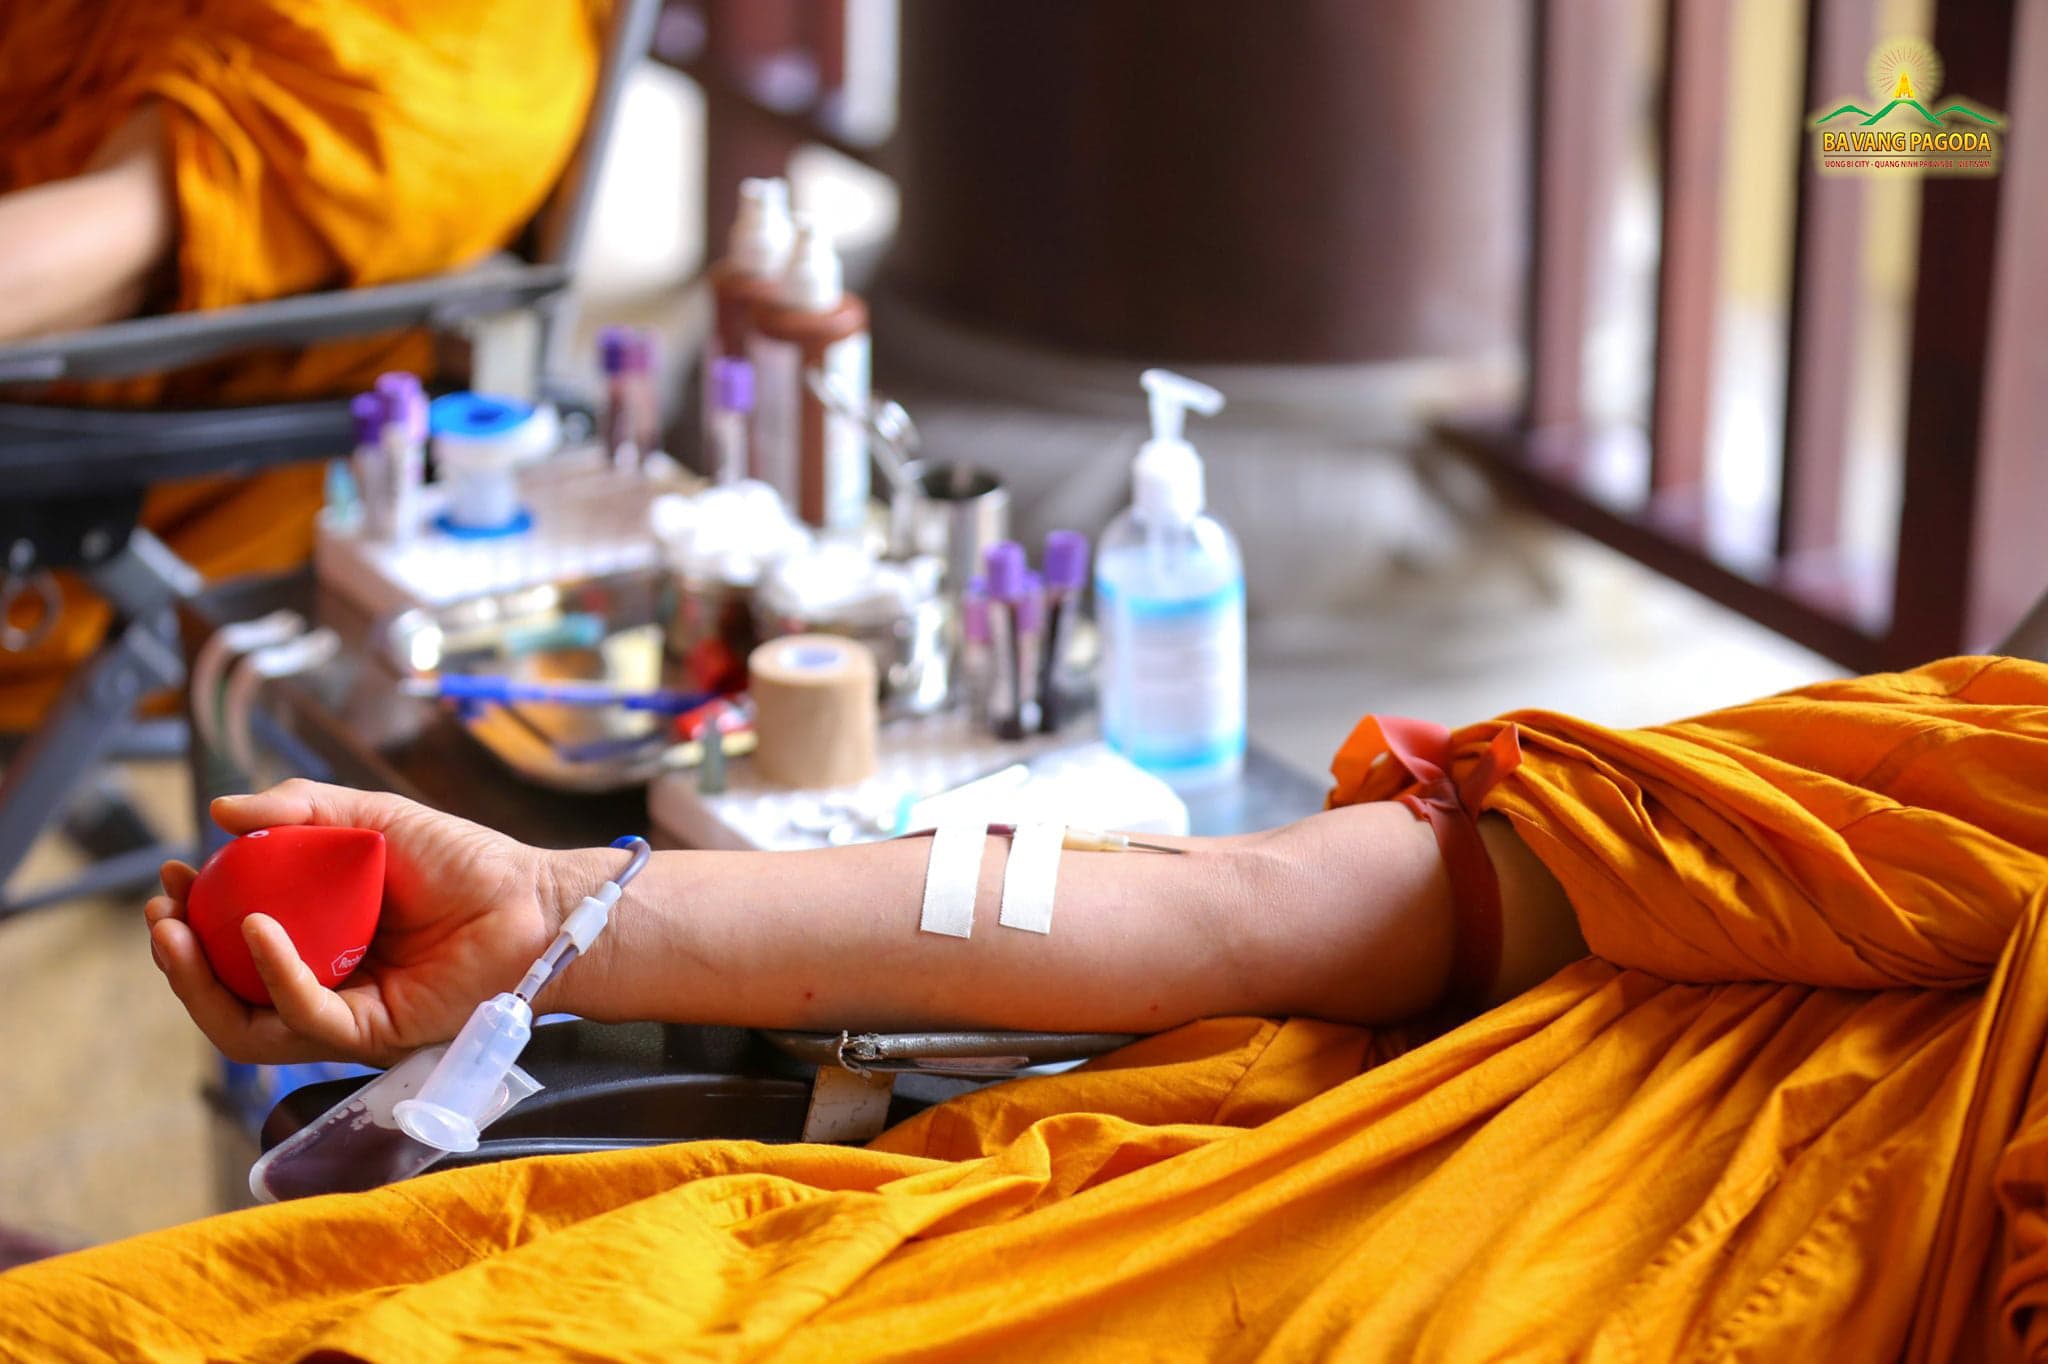 Blood donation – a wise way to cultivate compassion and loving-kindness.